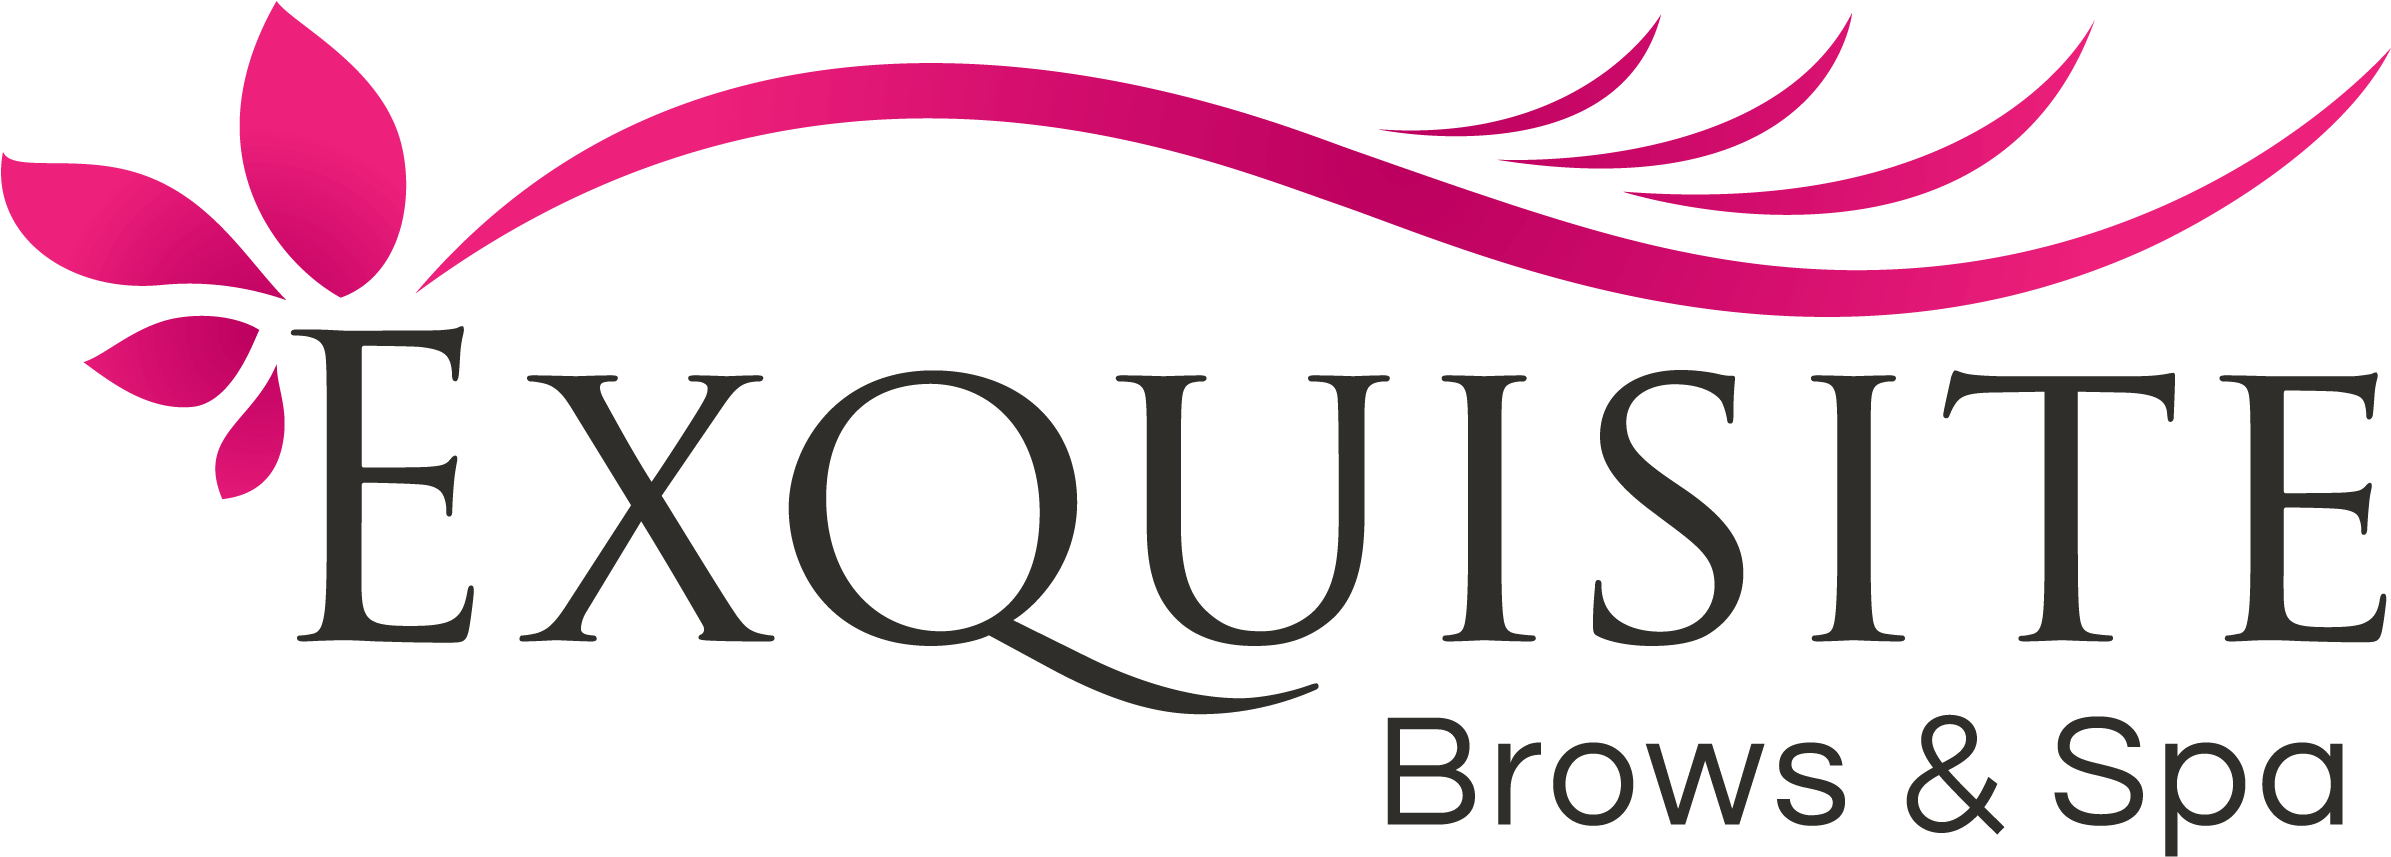 Exquisite Brows & Spa - Eyebrow Spa Logo (2835x1346), Png Download